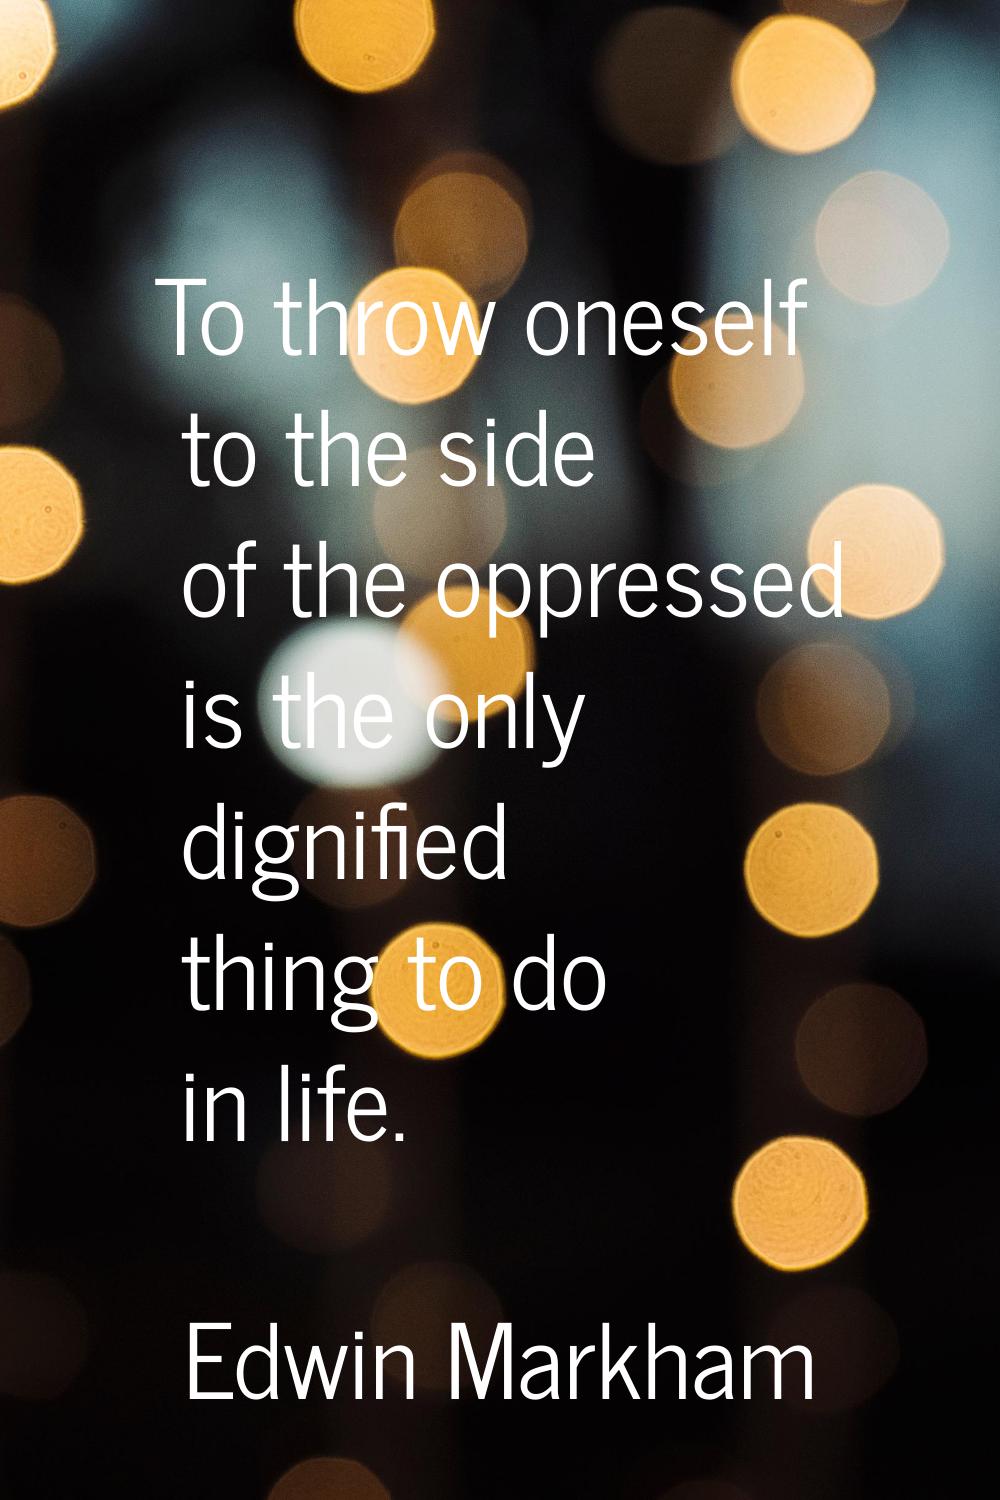 To throw oneself to the side of the oppressed is the only dignified thing to do in life.